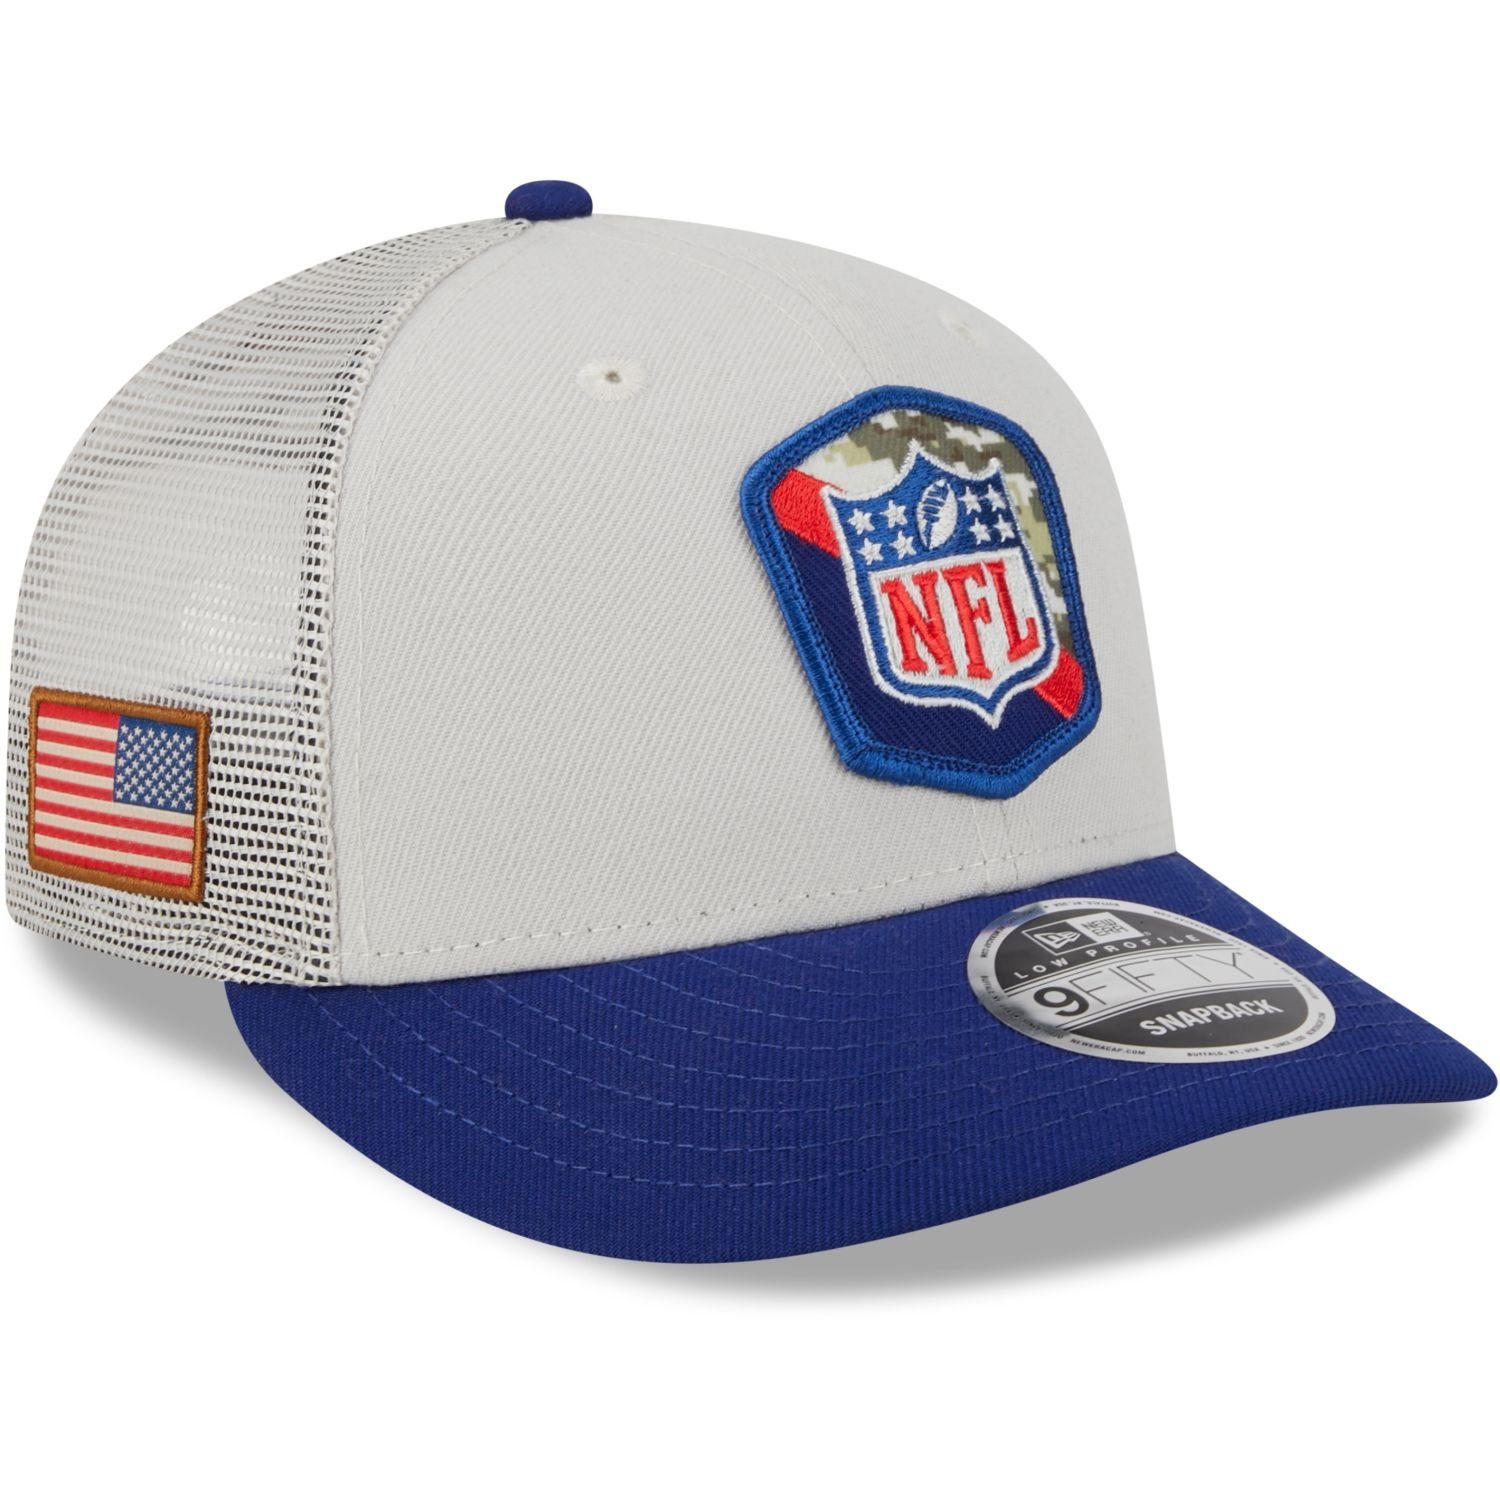 New SHIELD Era NFL to Cap Profile Snap Salute Low 9Fifty NFL Snapback Service